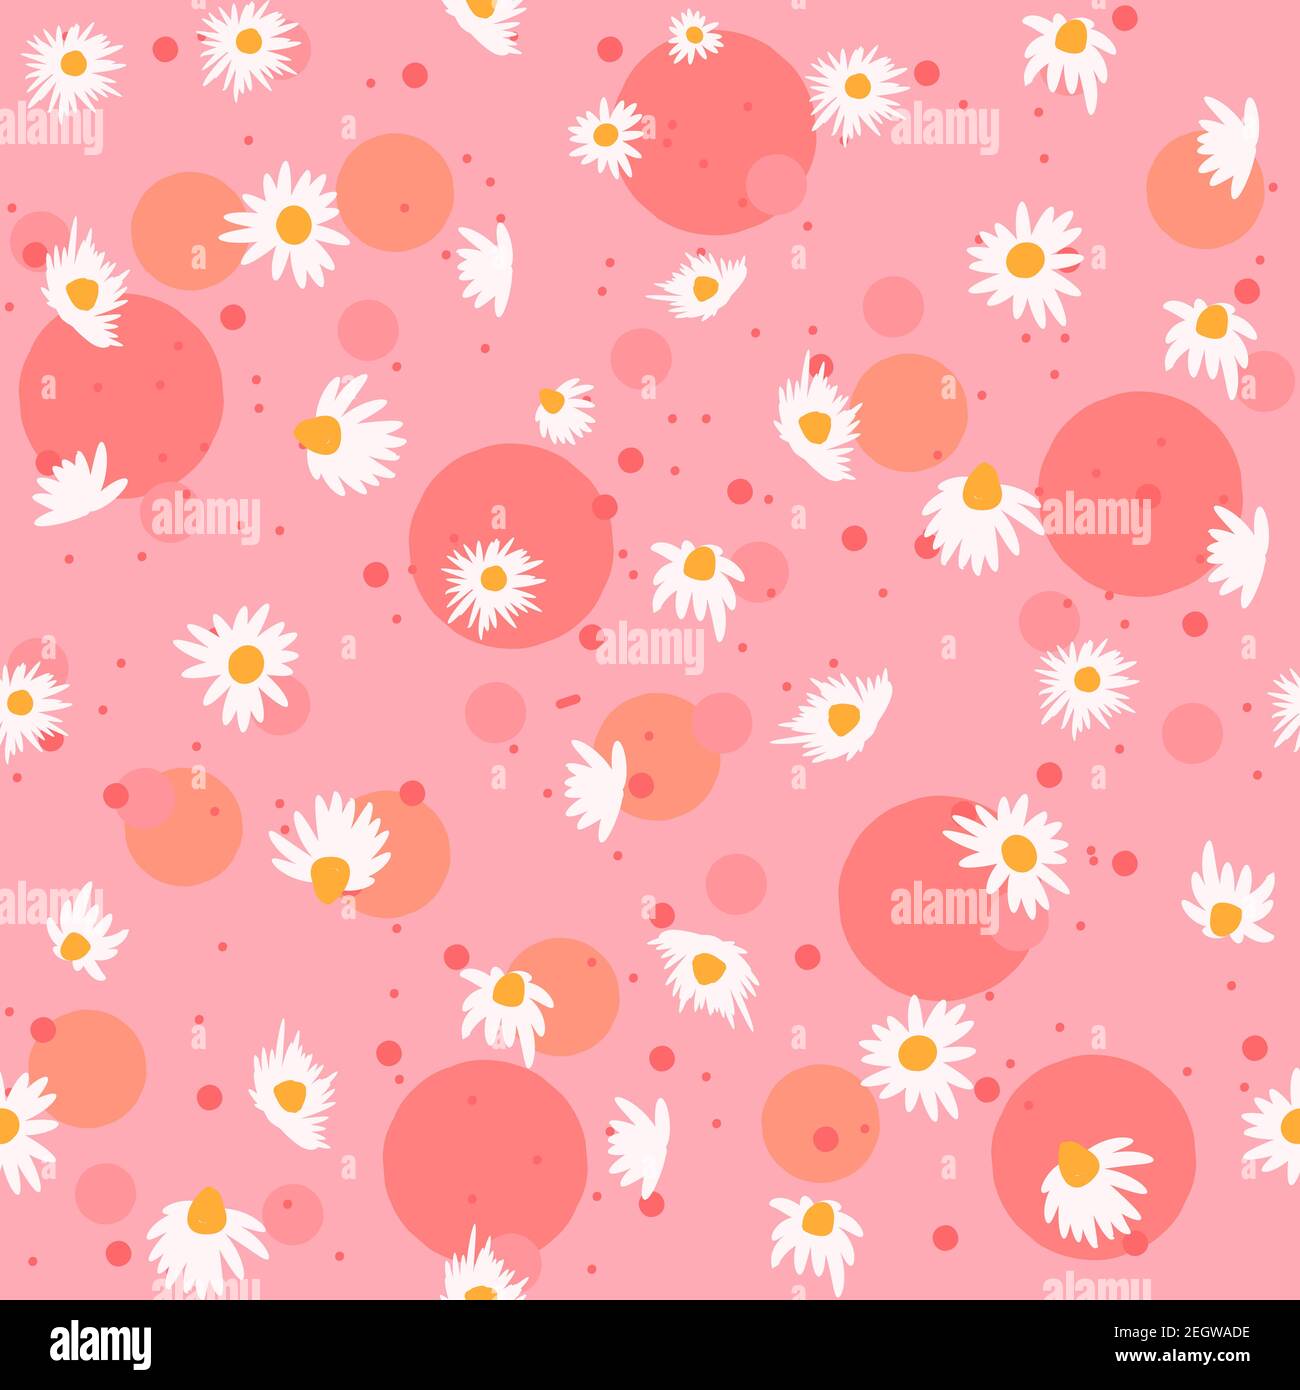 Spring seamless pattern with chamomile flowers and pink bubbles. Repetitive feminine and floral background with white flowers. Herbal wrapping paper. Stock Vector